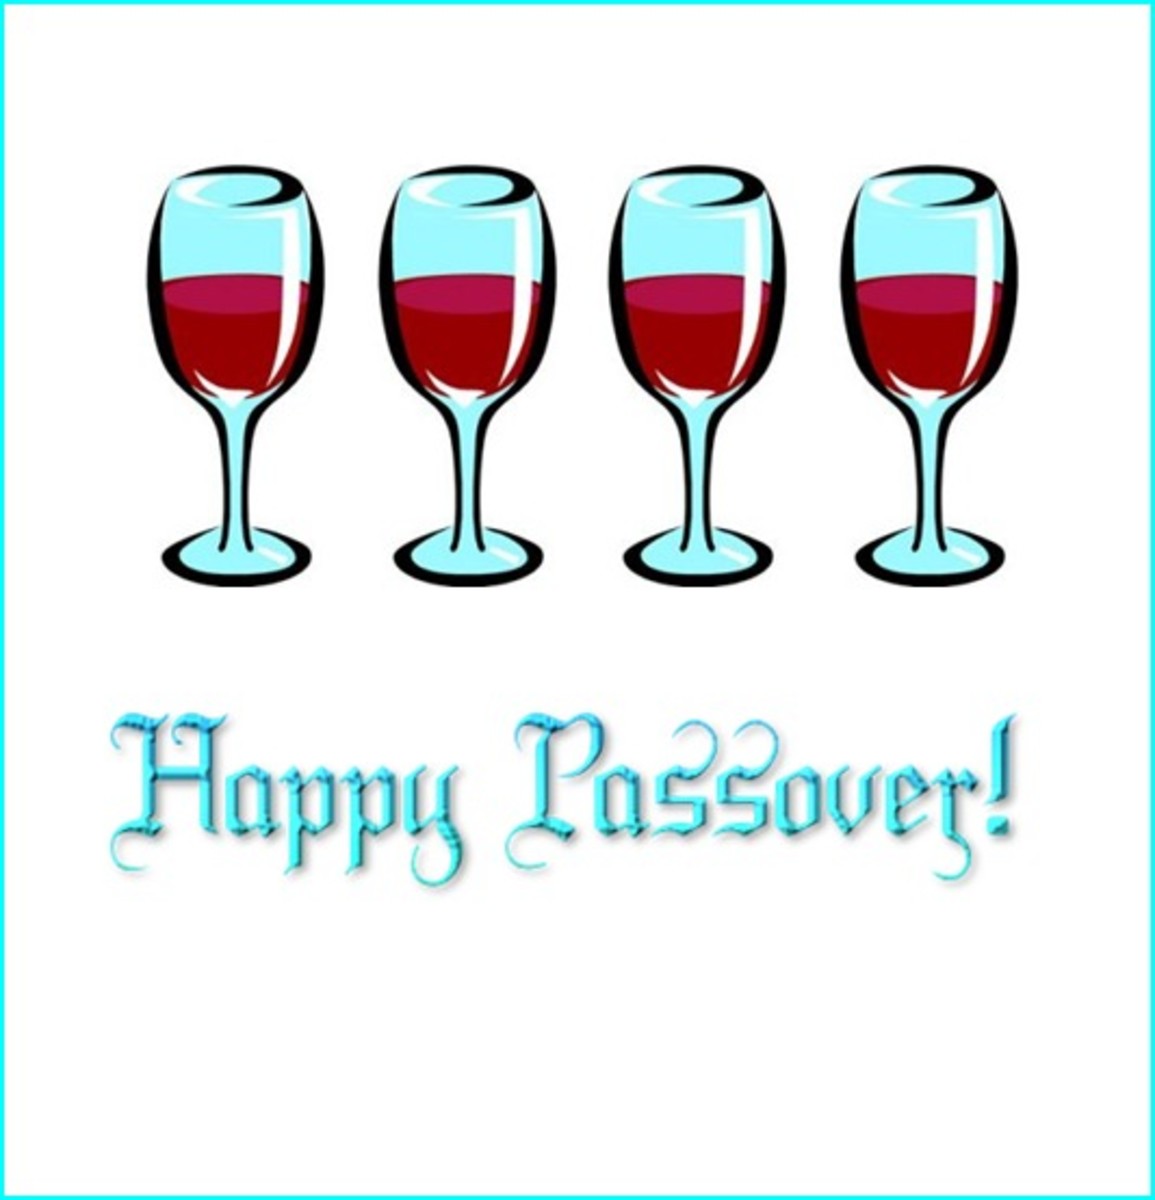 Happy Passover with the Four Cups of Wine from the Seder